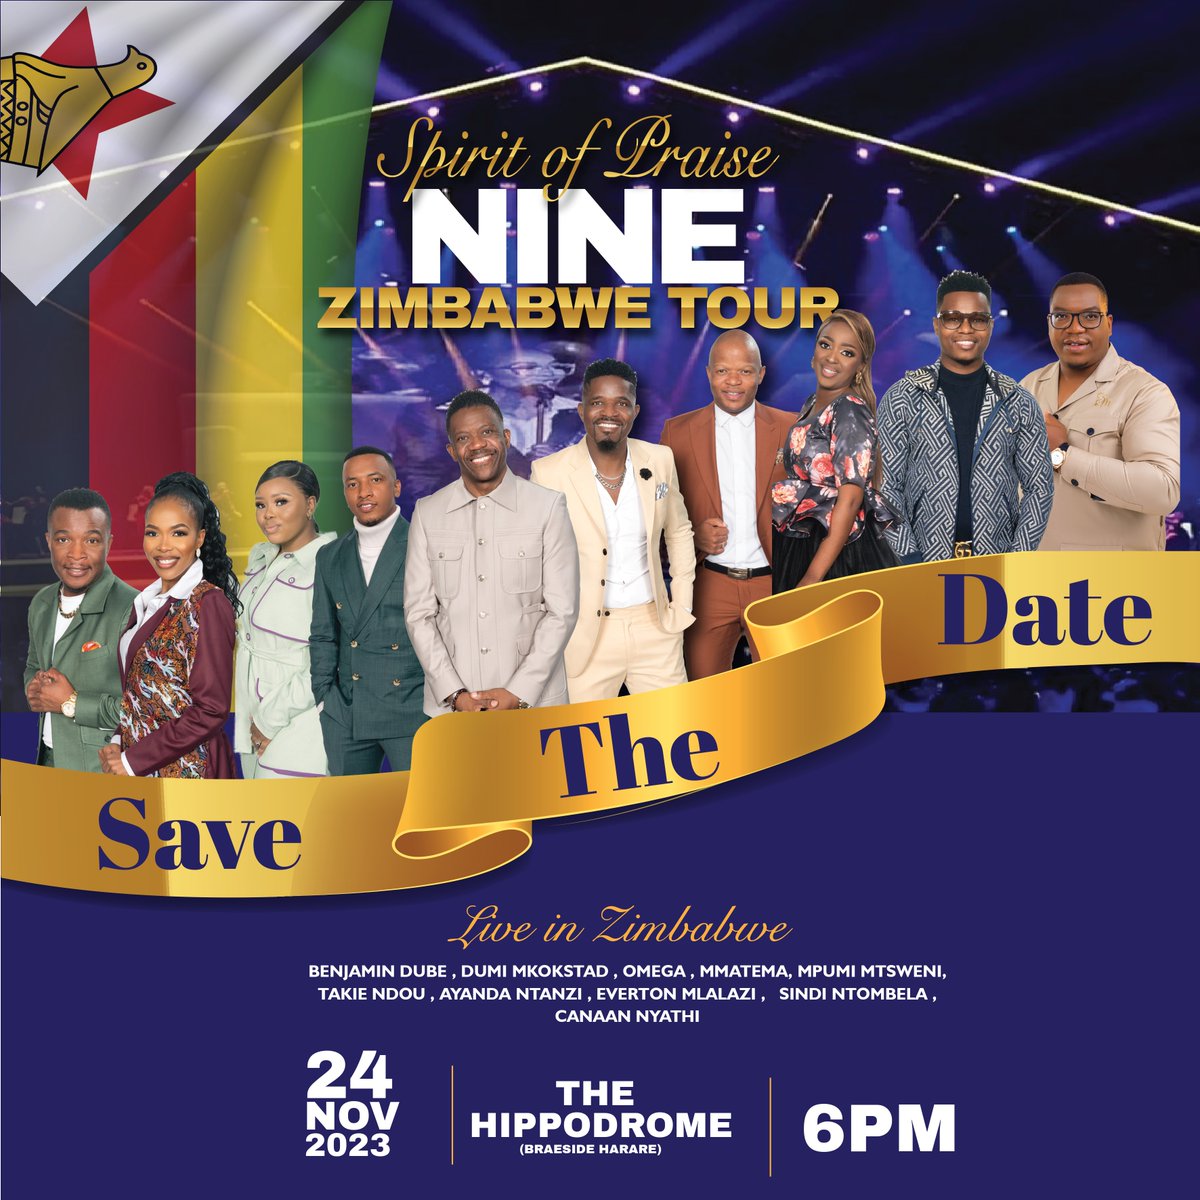 Spirit Of Praise is coming to Zimbabwe for the very 1st time on 24 November! 🙌🙌👏👏😎😎